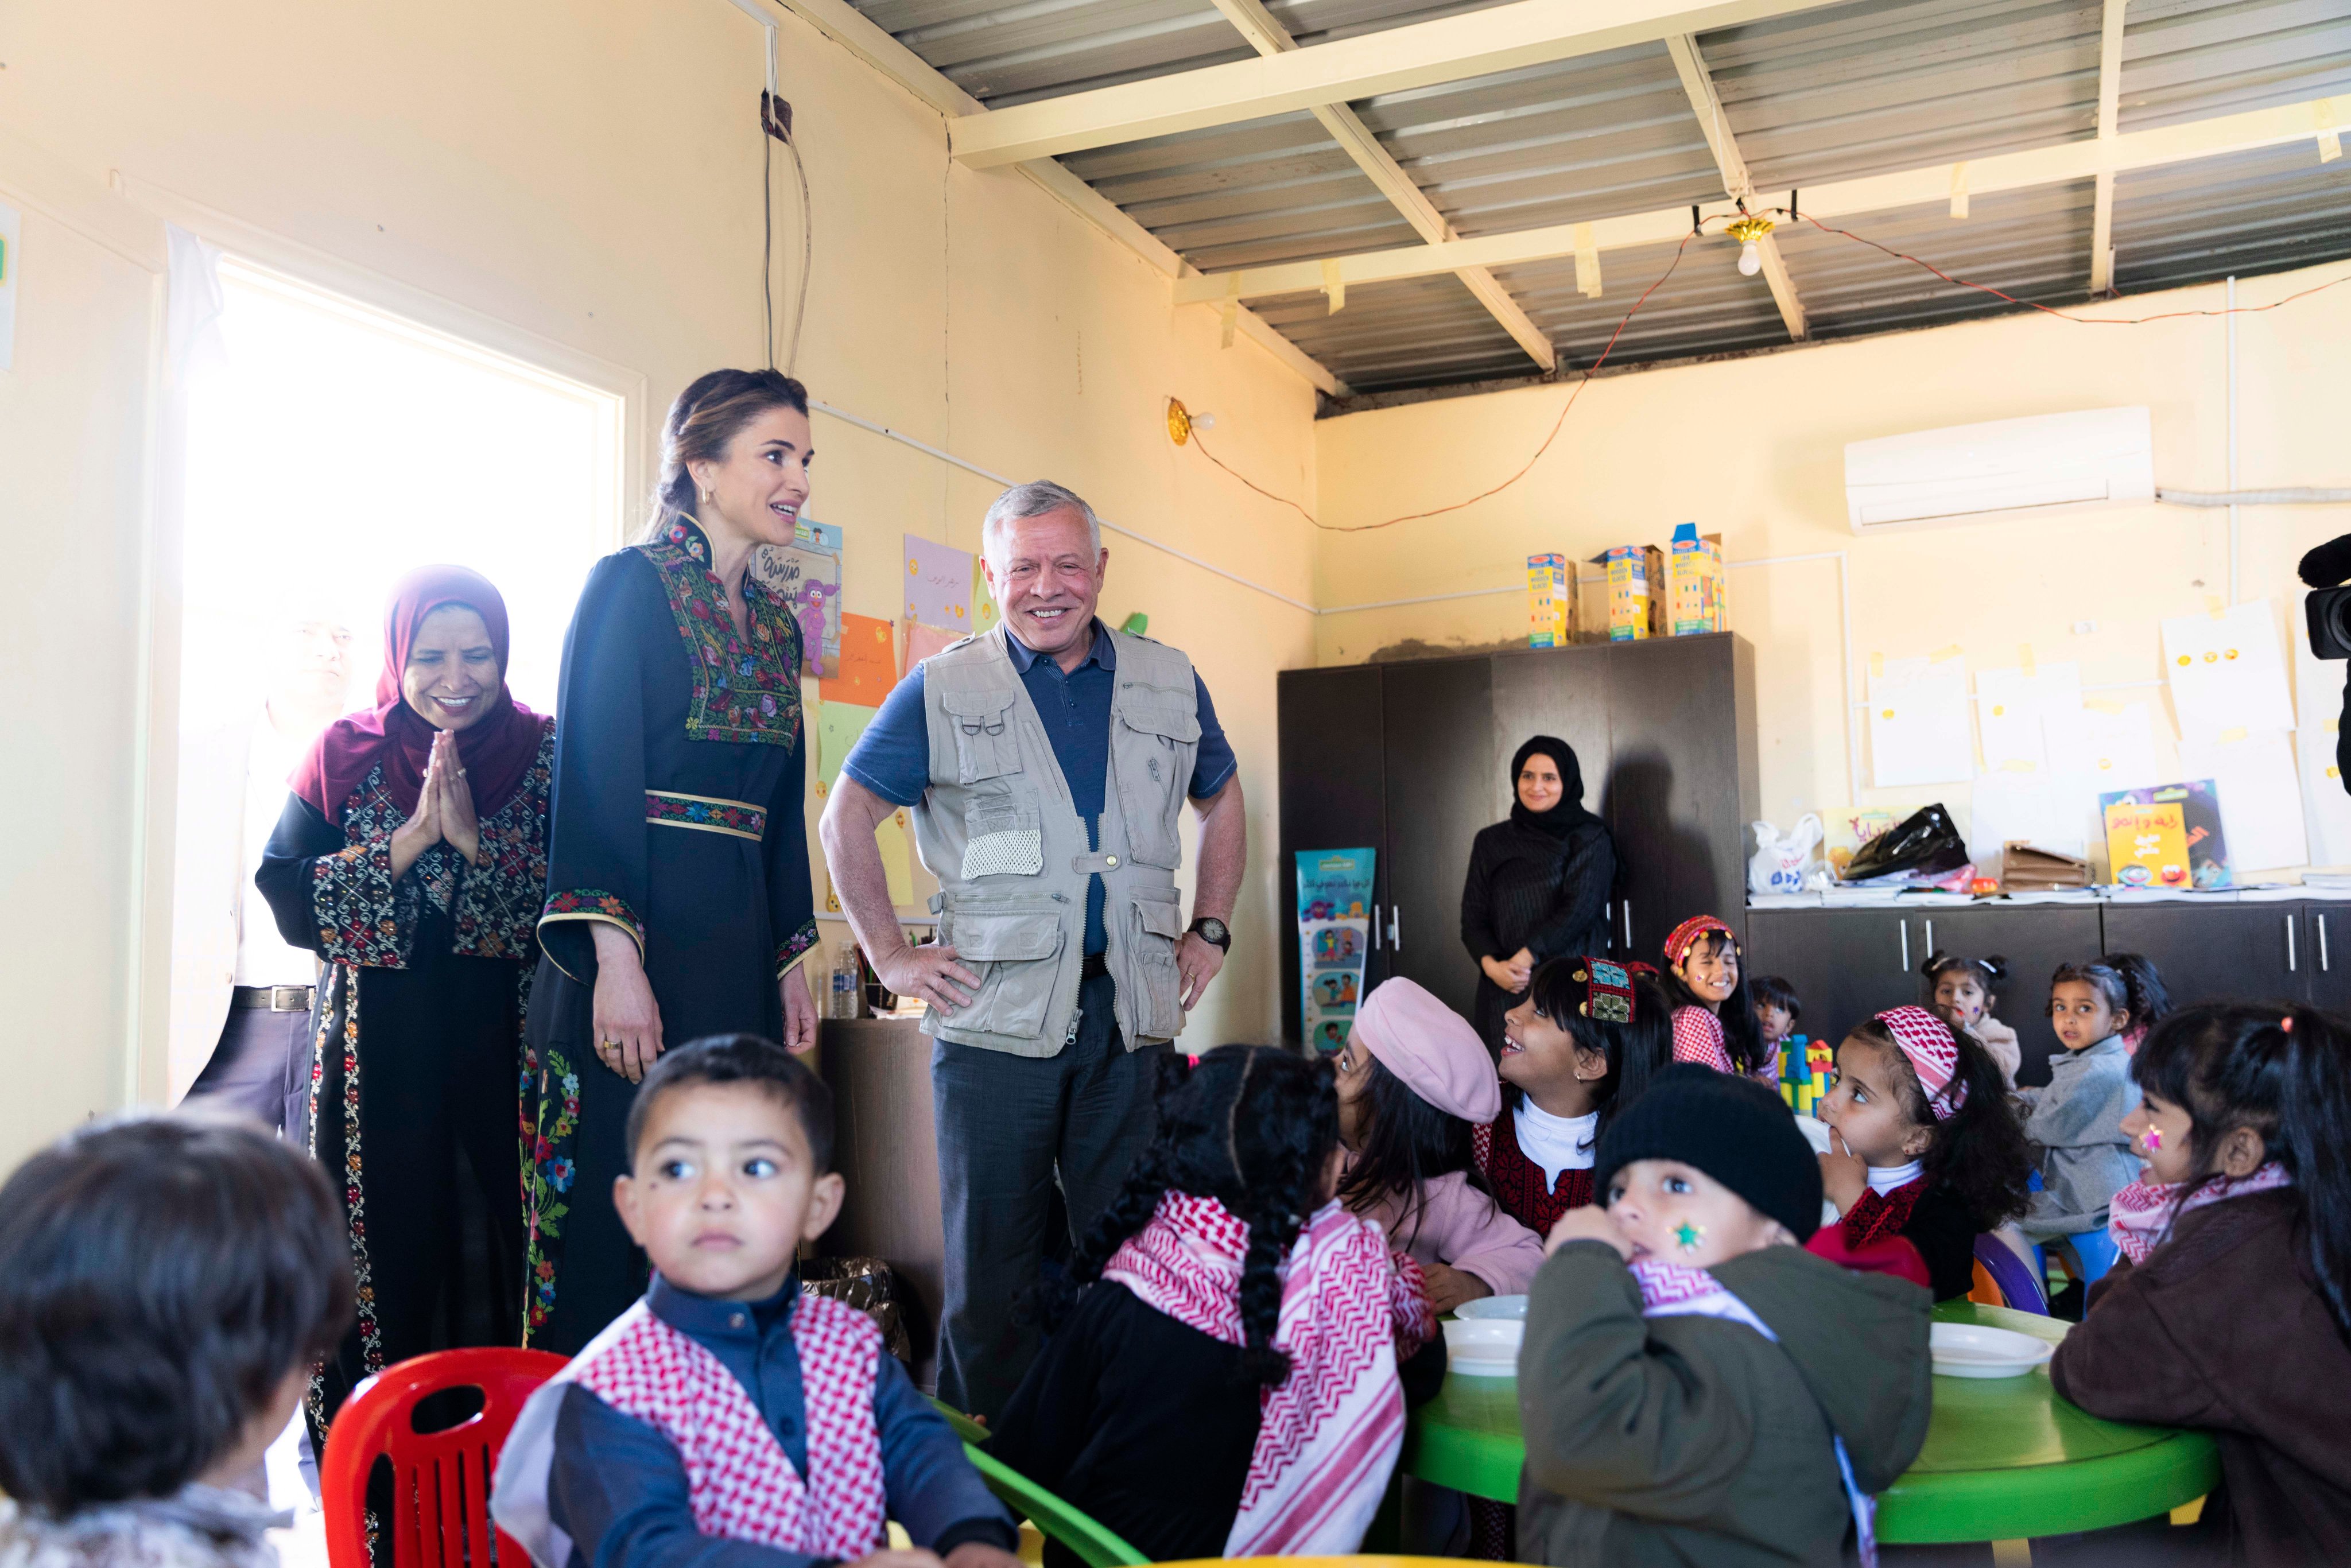 Queen Rania joined King Abdullah II for a visit to Southern Badia